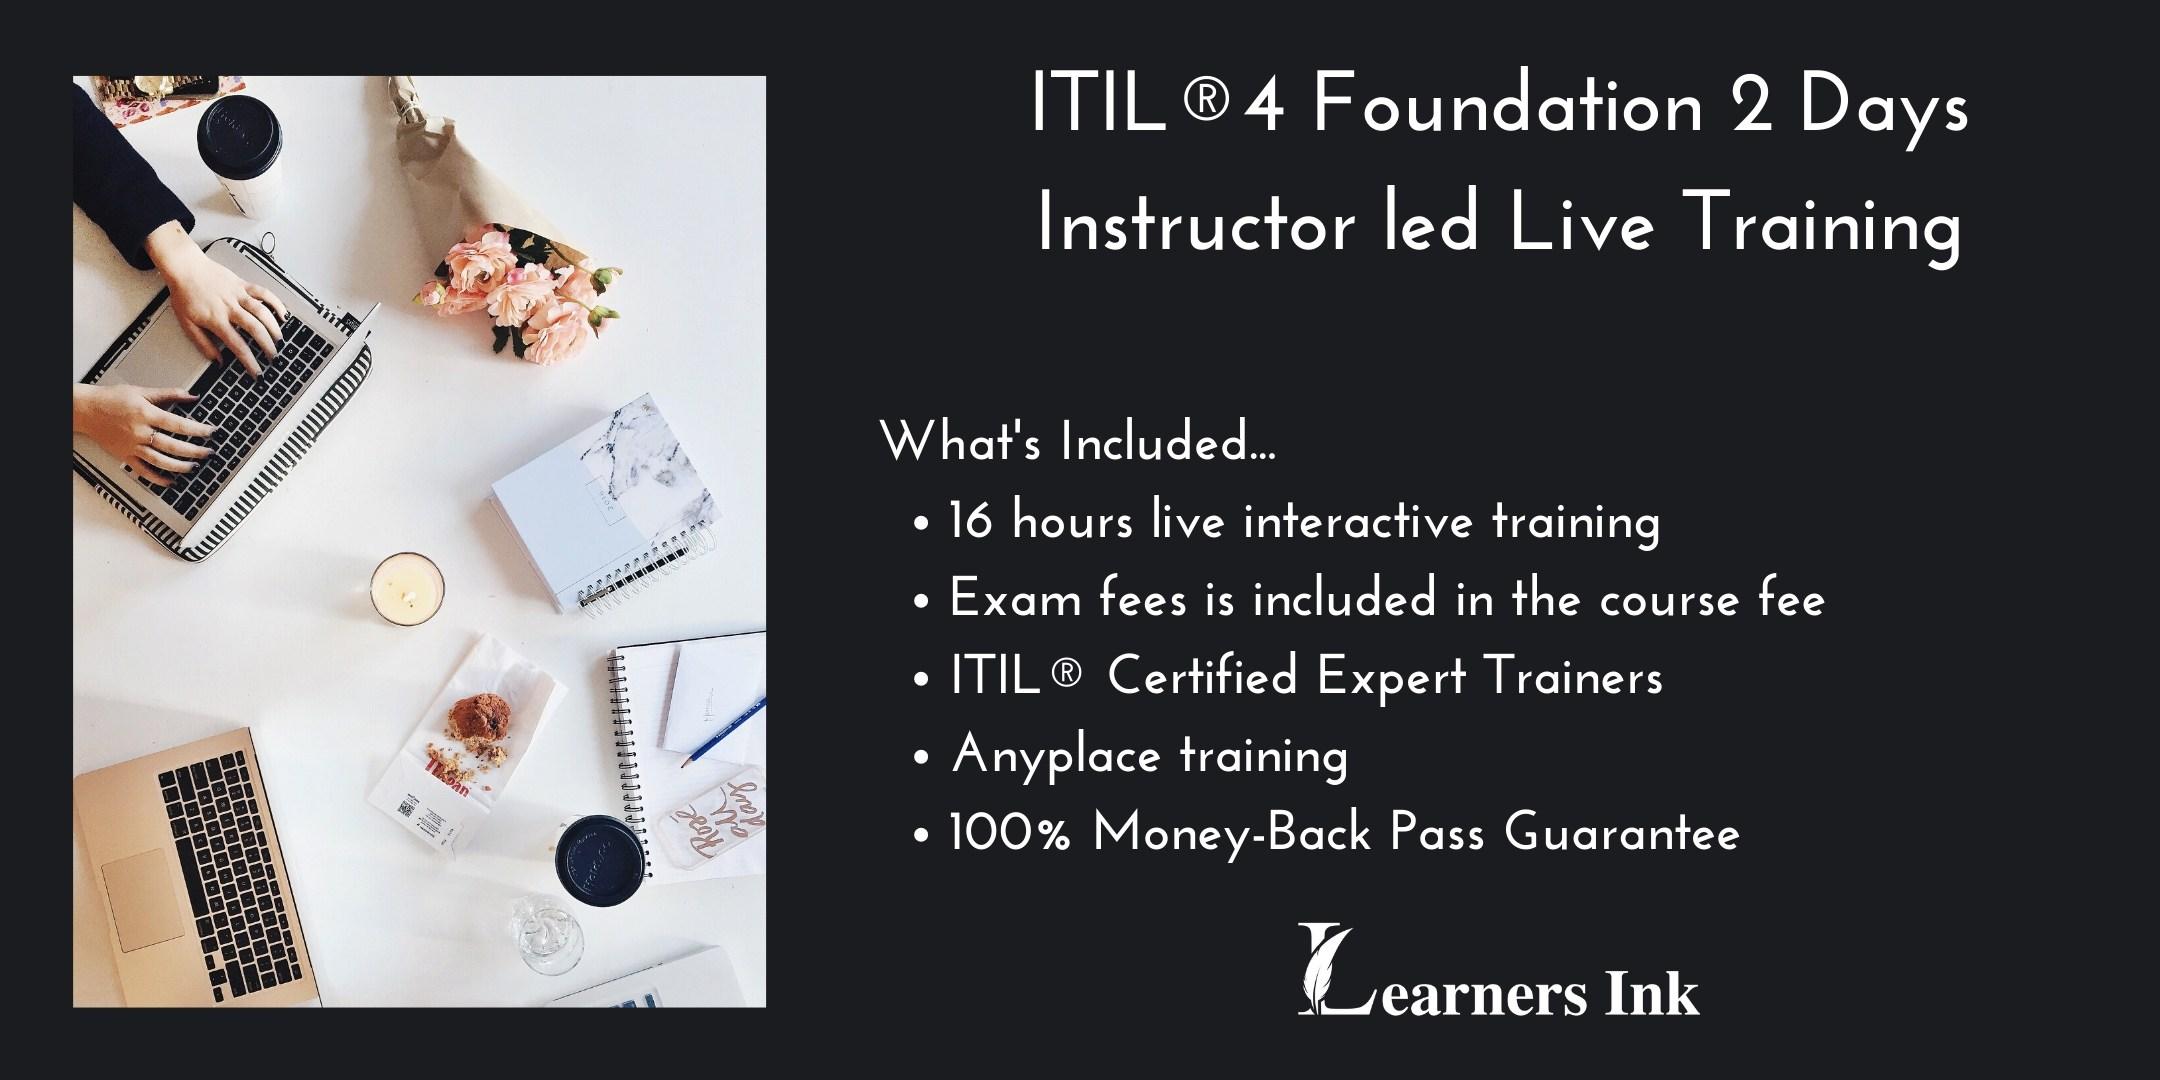 ITIL®4 Foundation 2 Days Certification Training in Vancouver